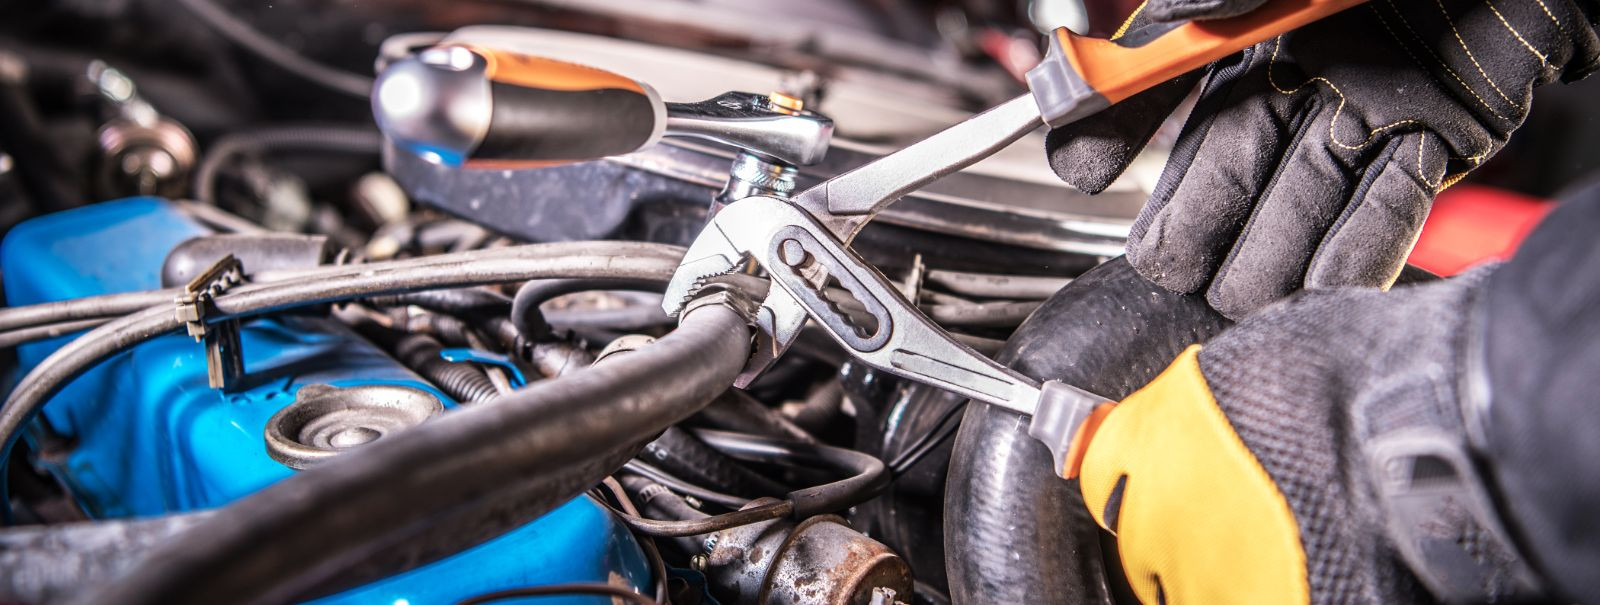 As a vehicle owner or business managing a fleet, understanding the signs of car trouble can save you time and money, ensuring safety on the road. Here are five 